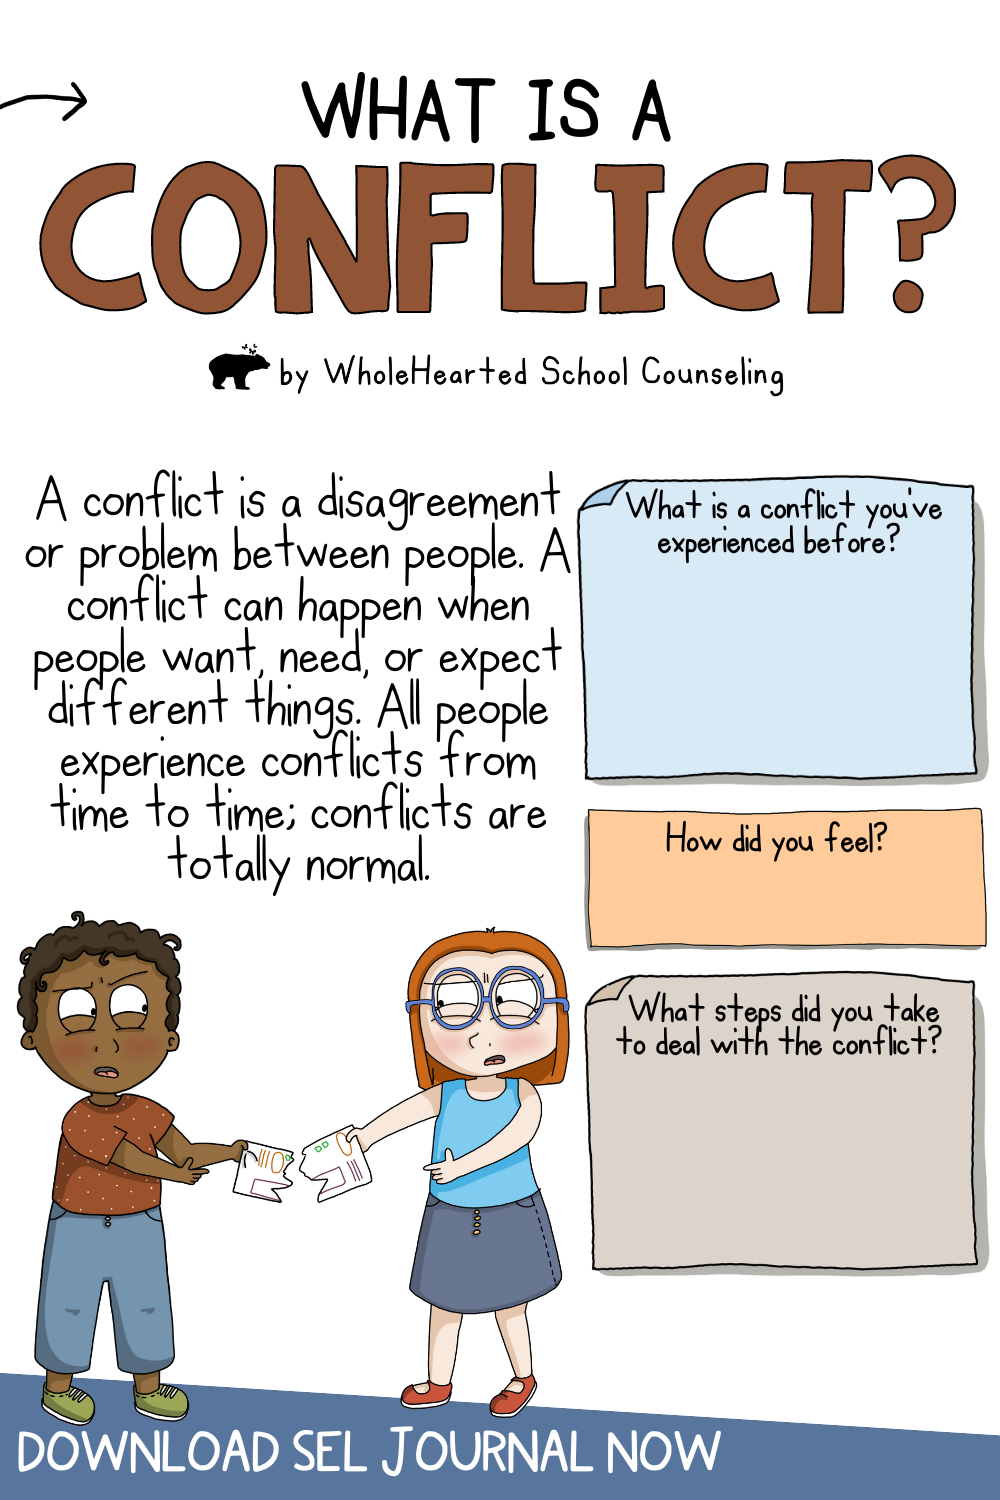 What is Conflict poster for kids.